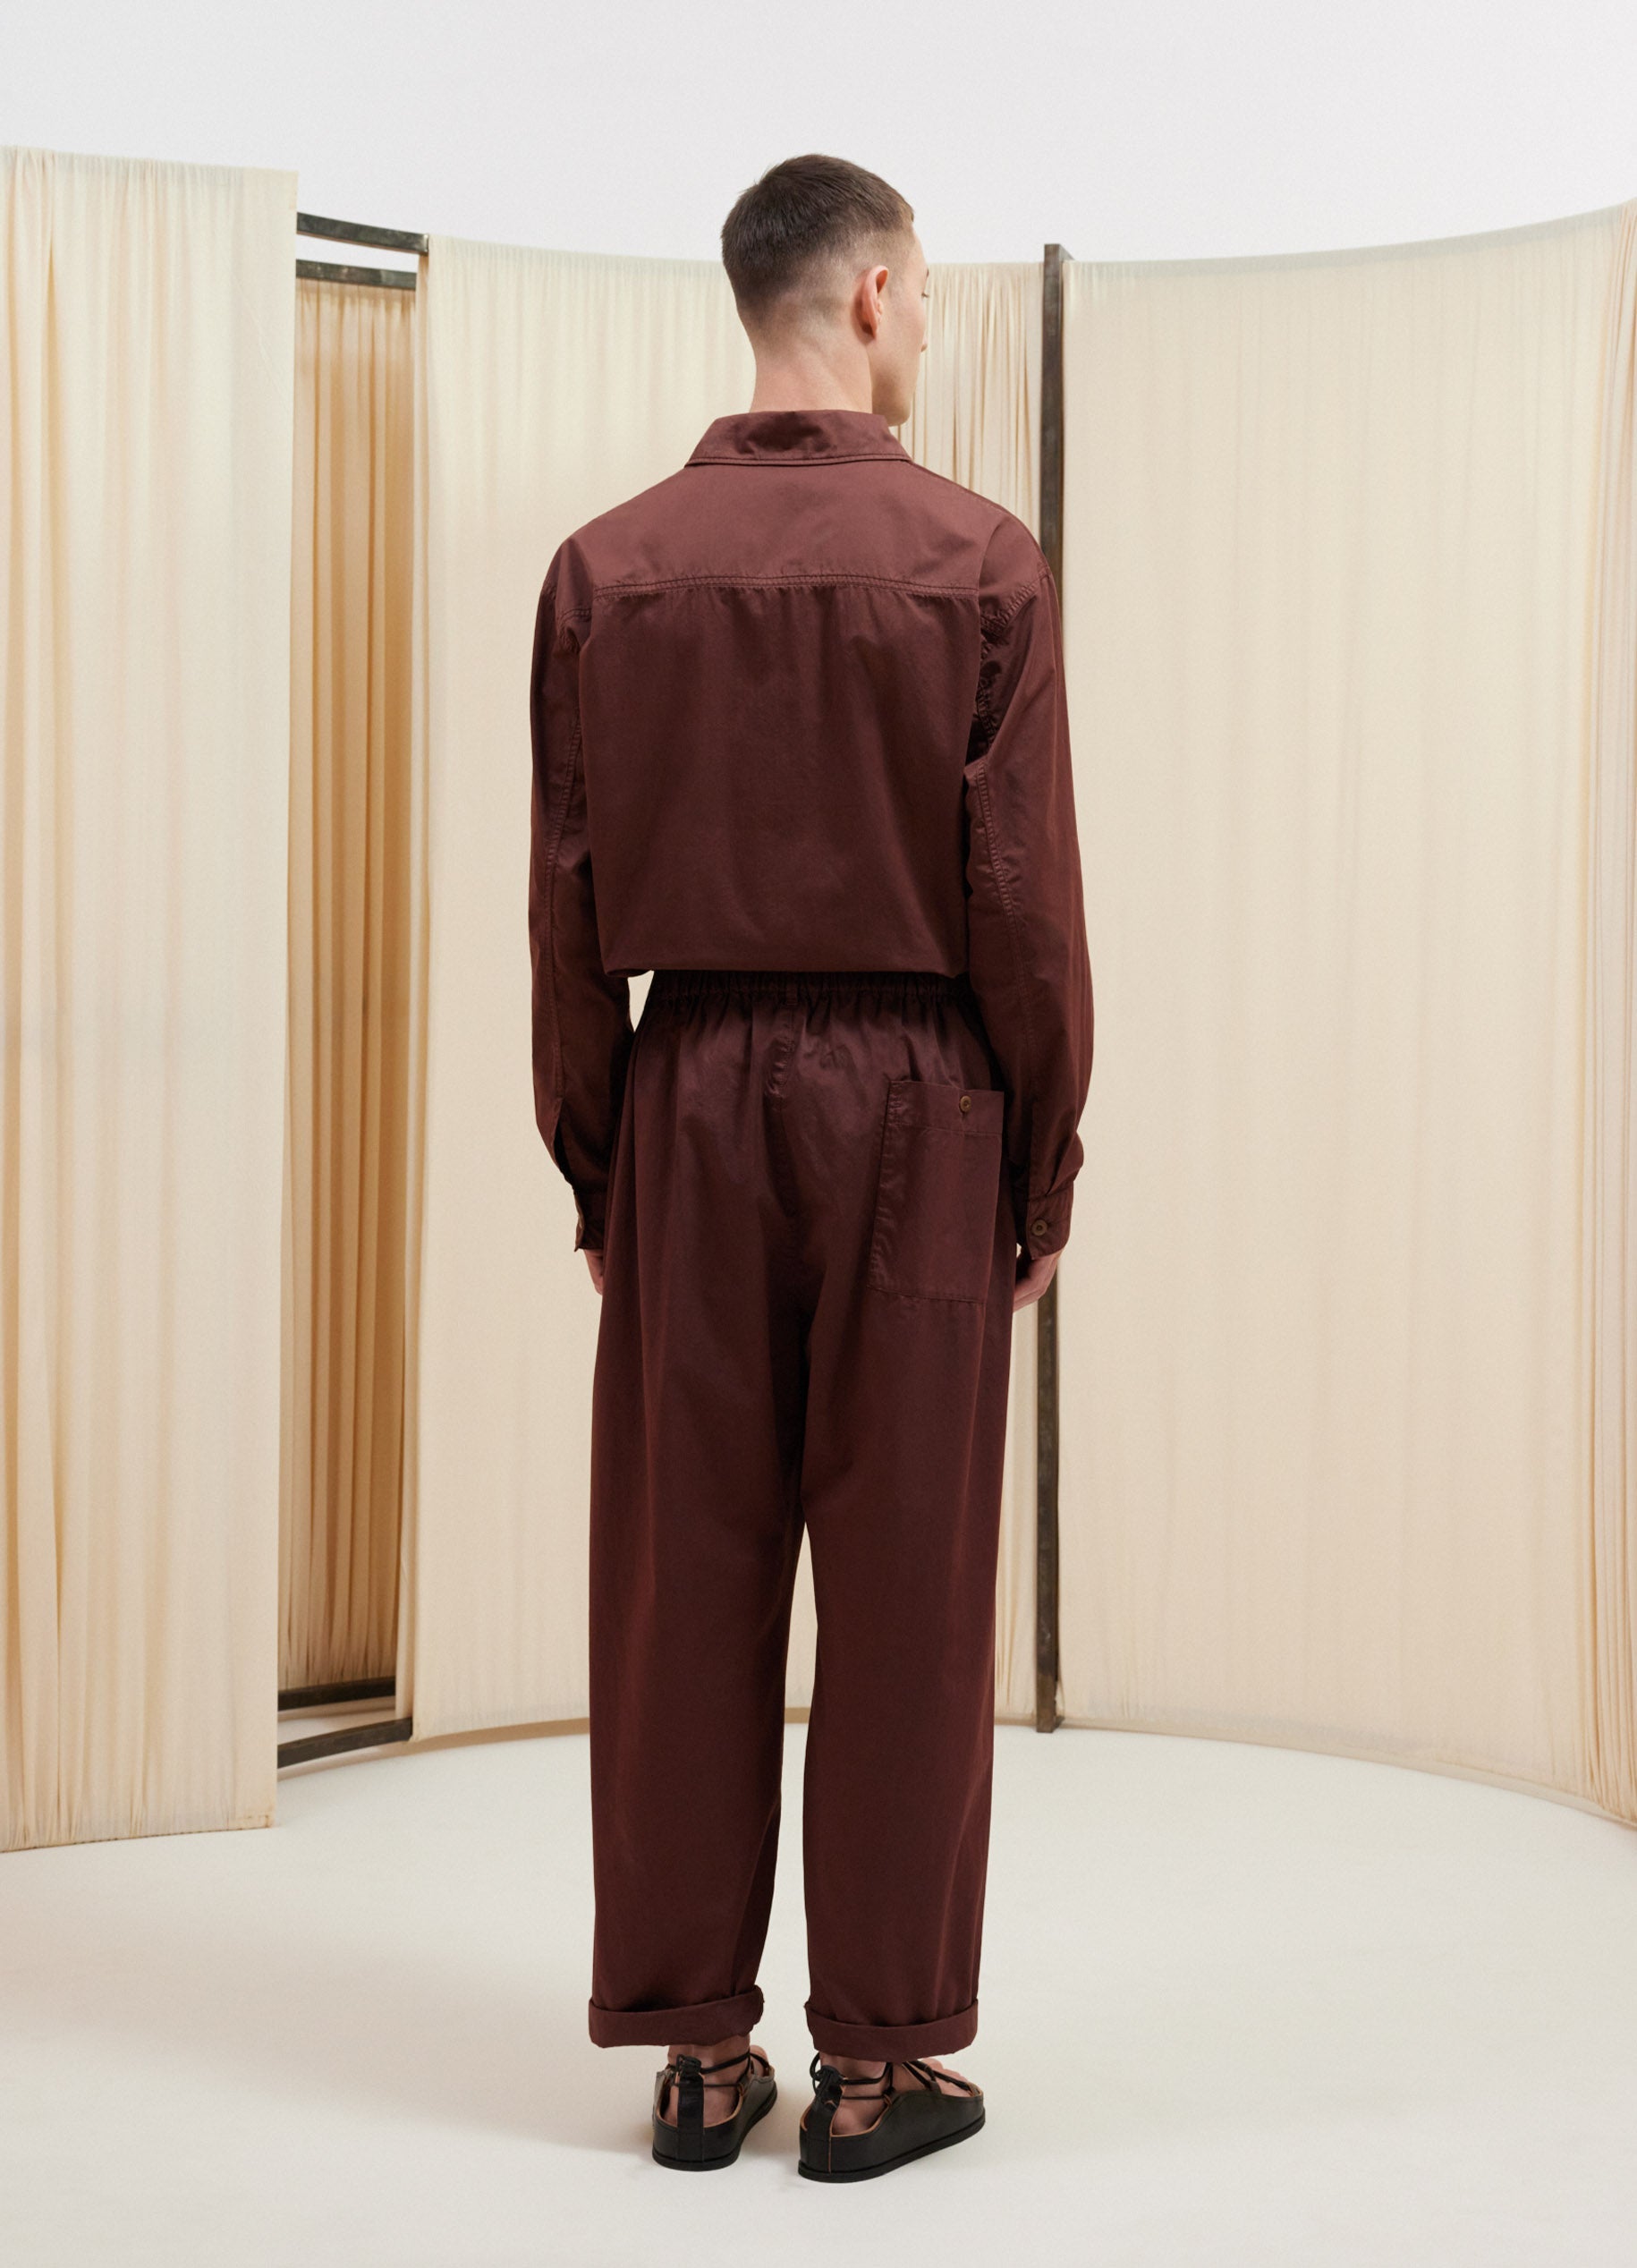 Cocoa Bean Relaxed Pants in Gd Light Cotton Satin | LEMAIRE